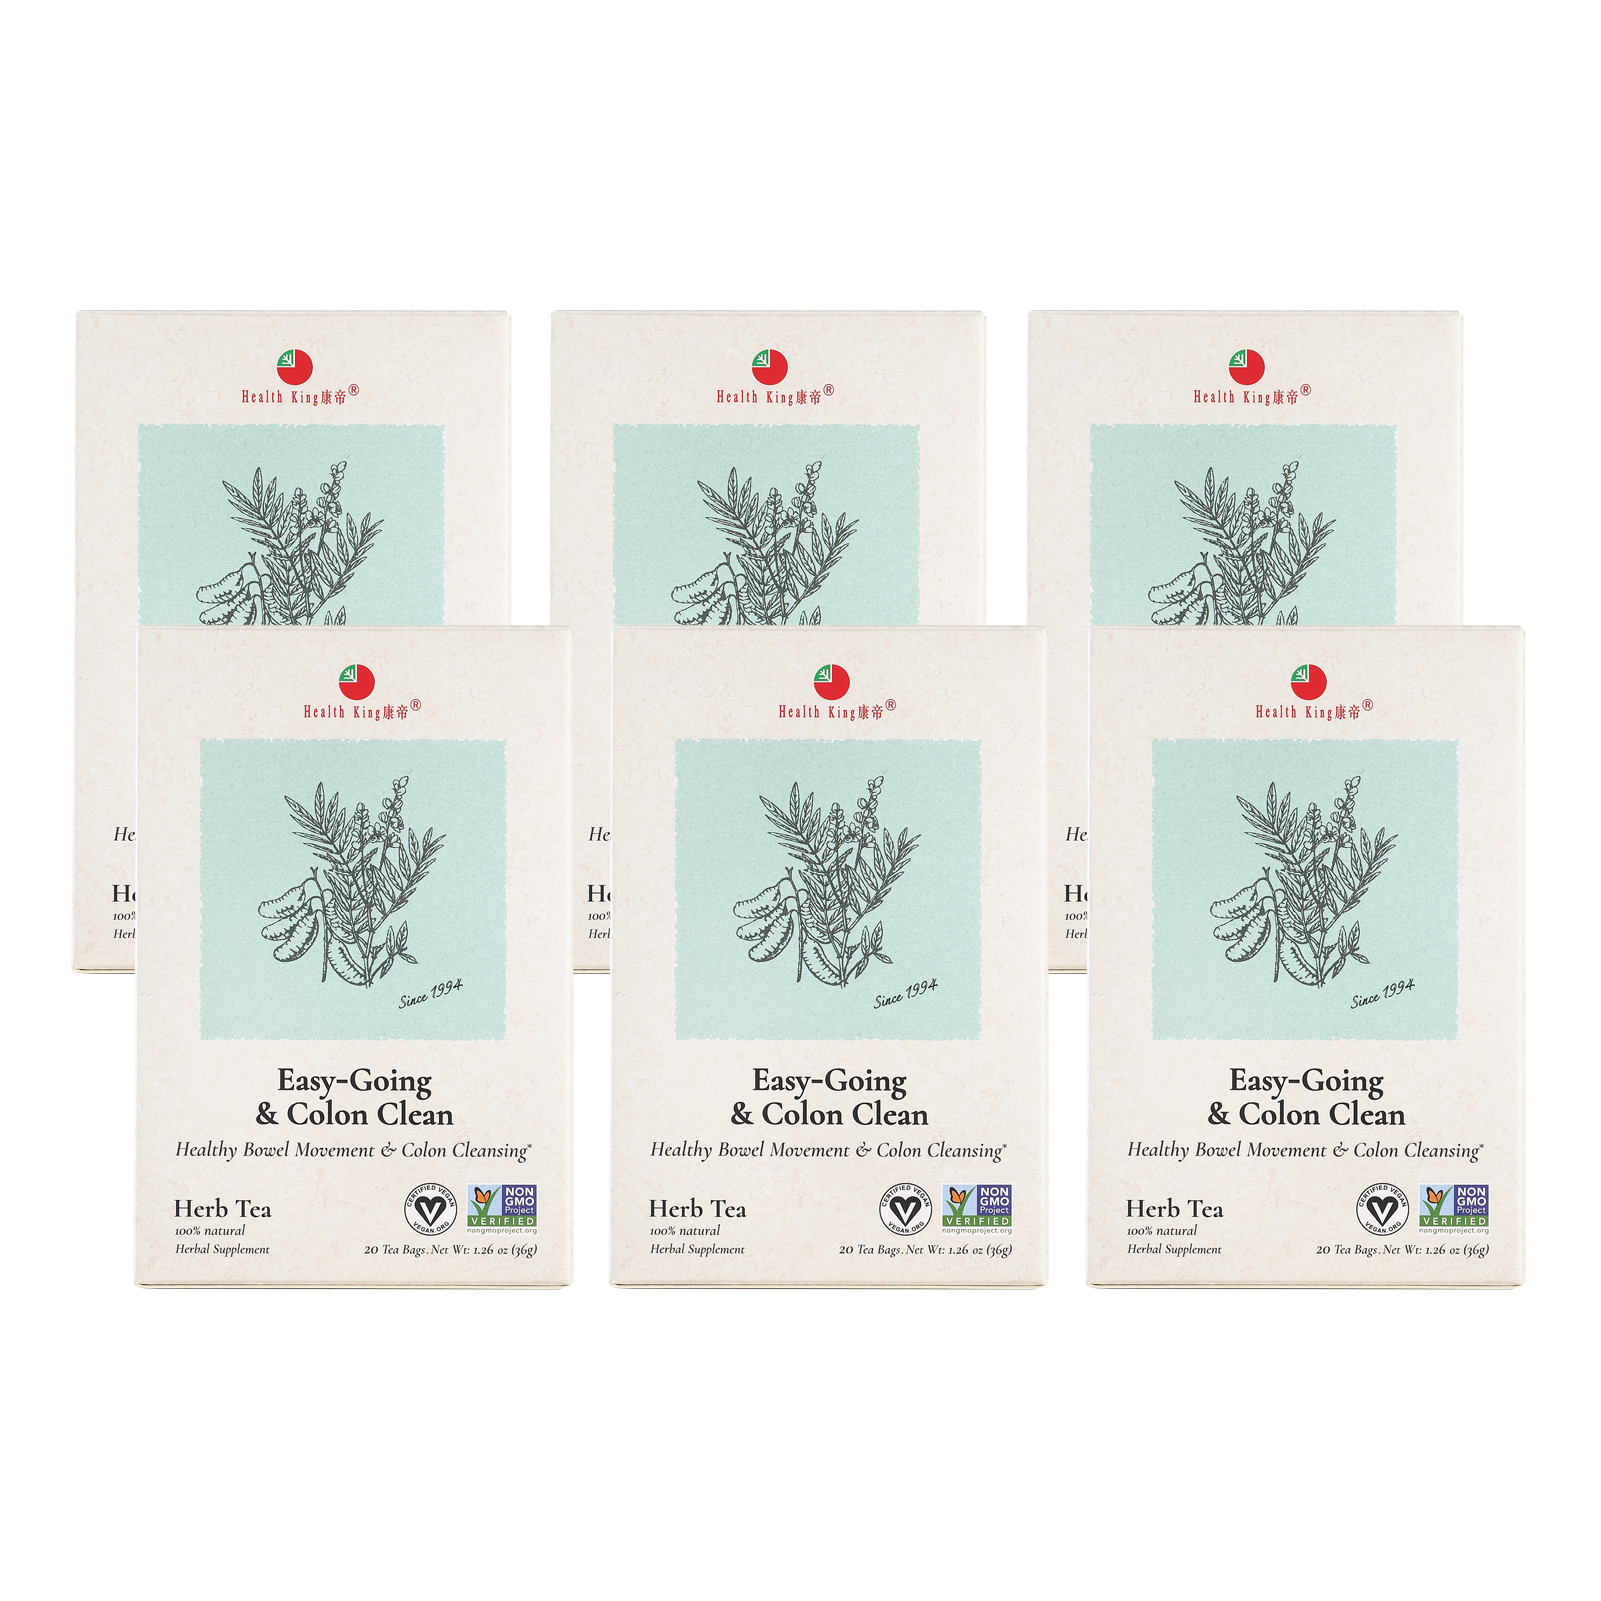 Multipack of Easy-Going & Colon Clean Herb Tea bags